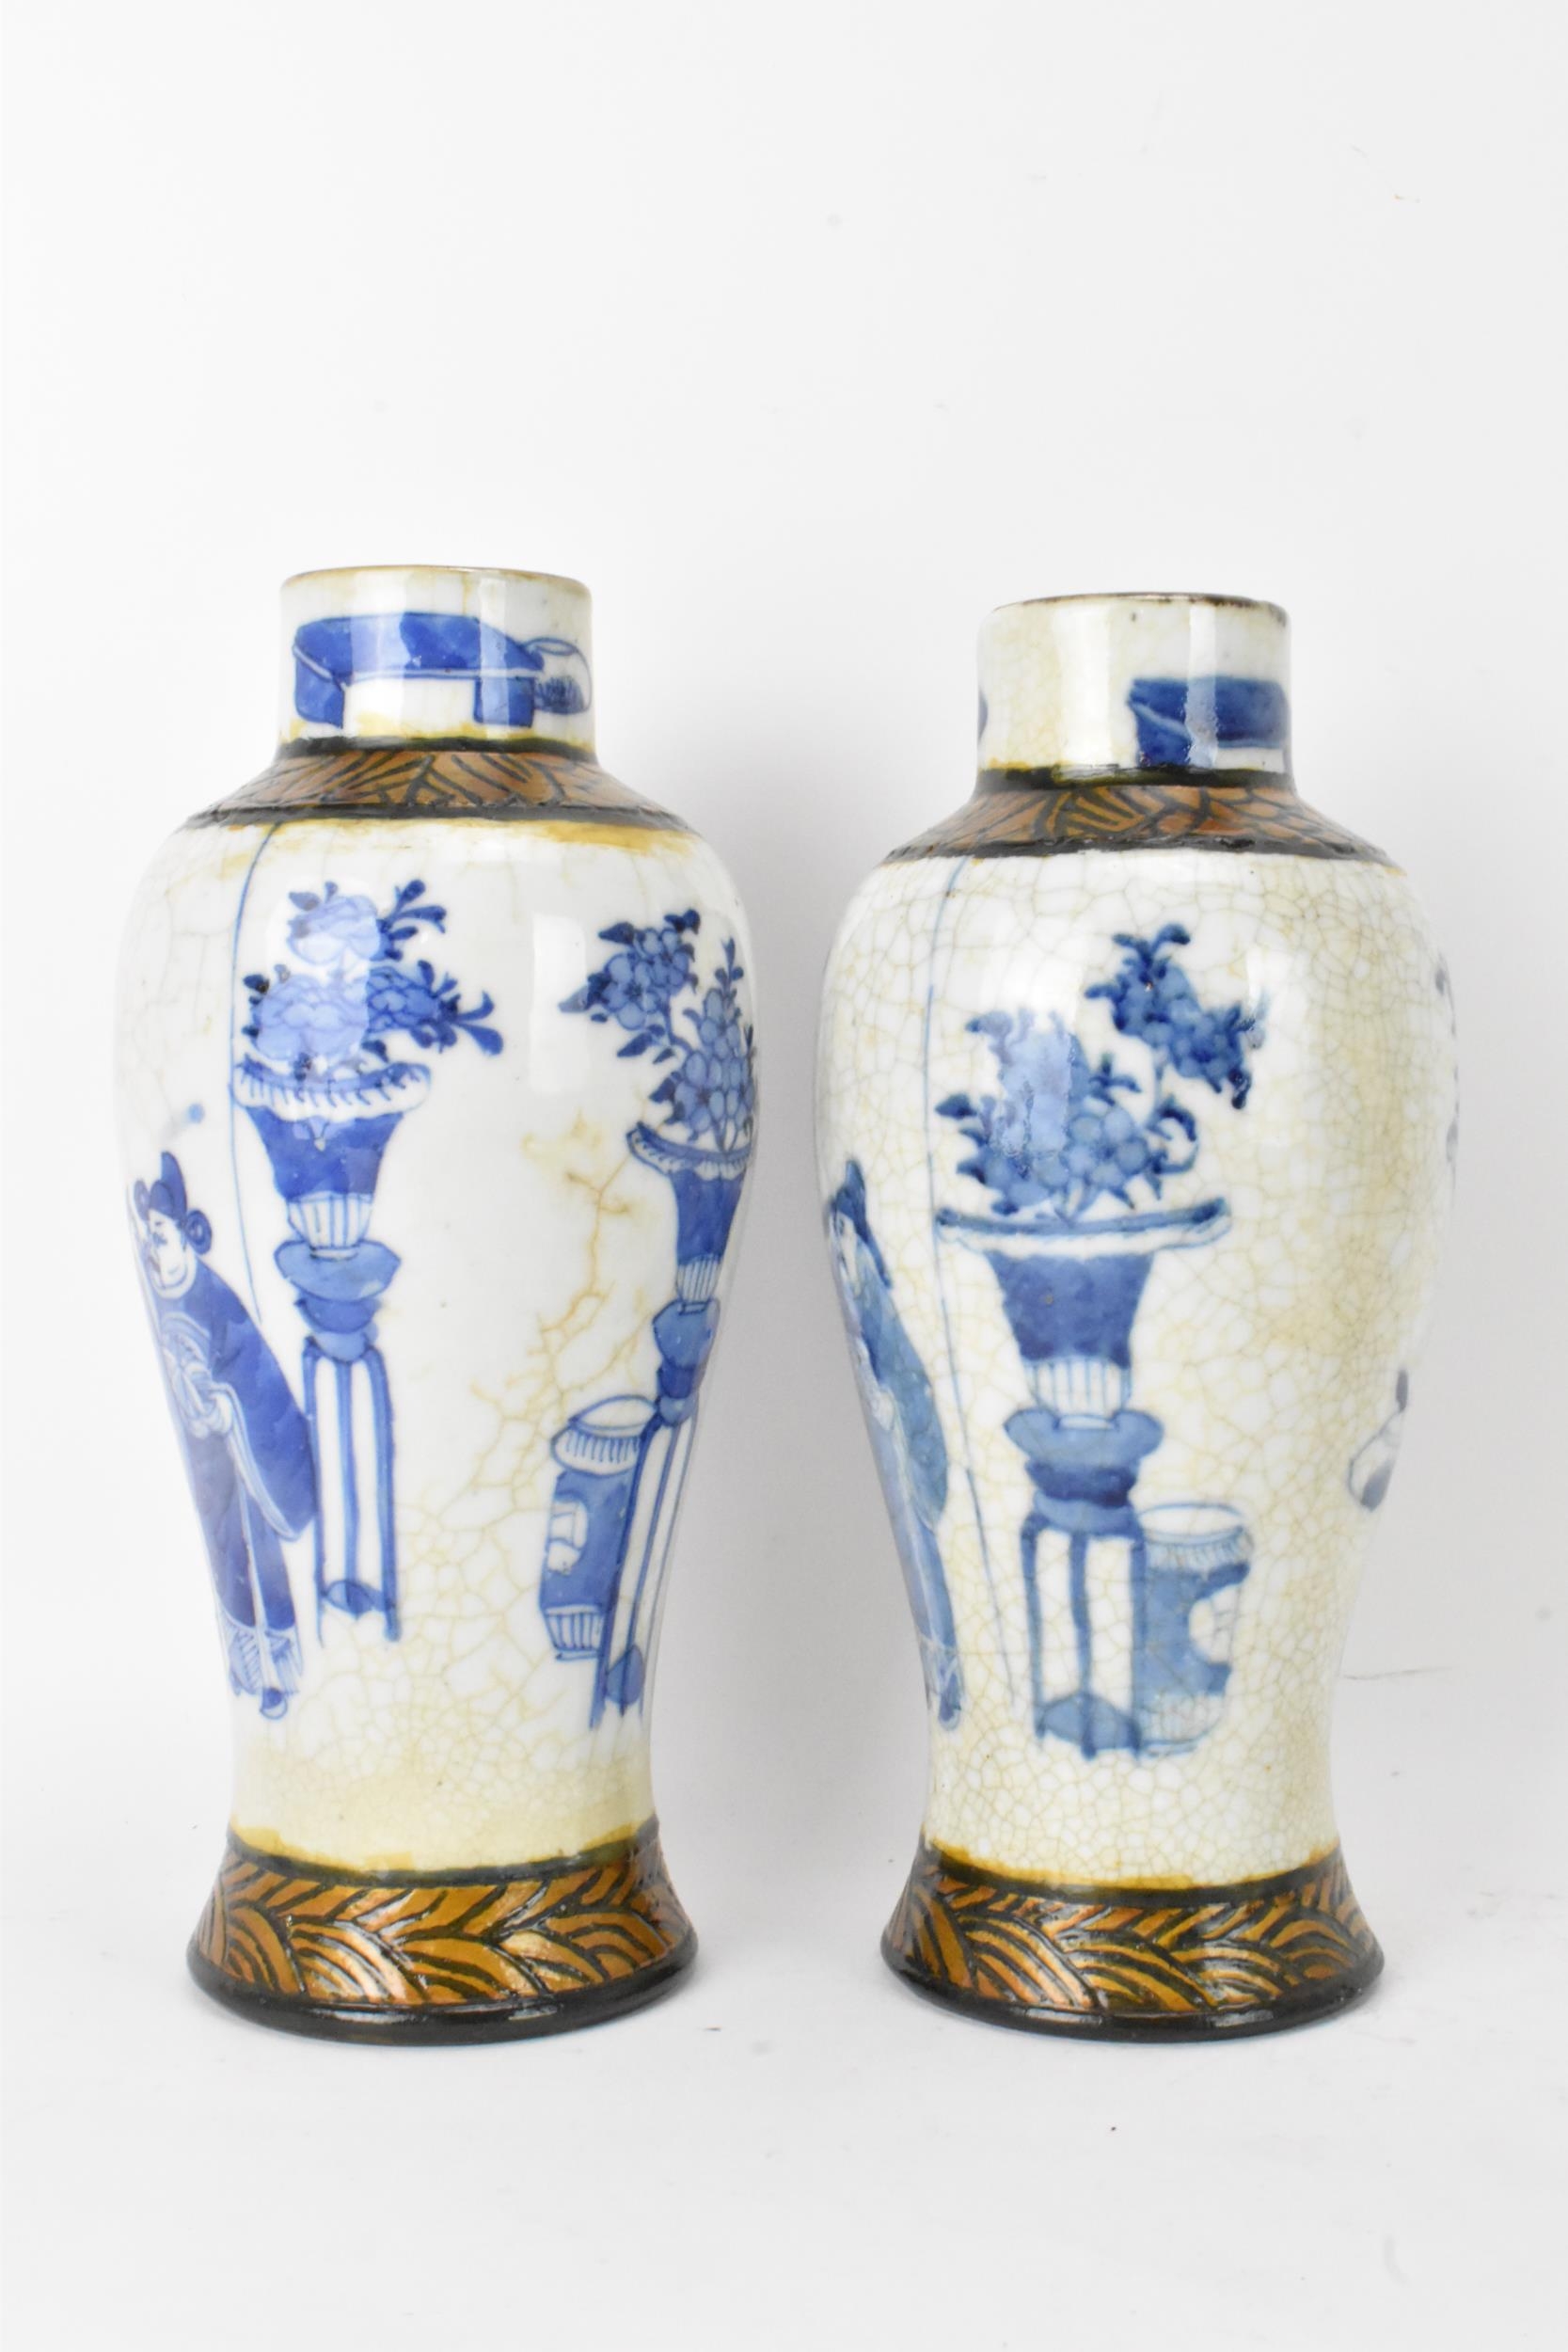 A pair of Chinese Nanking crackle glazed vases blue and white vases, Qing dynasty, 19th century, - Image 3 of 6